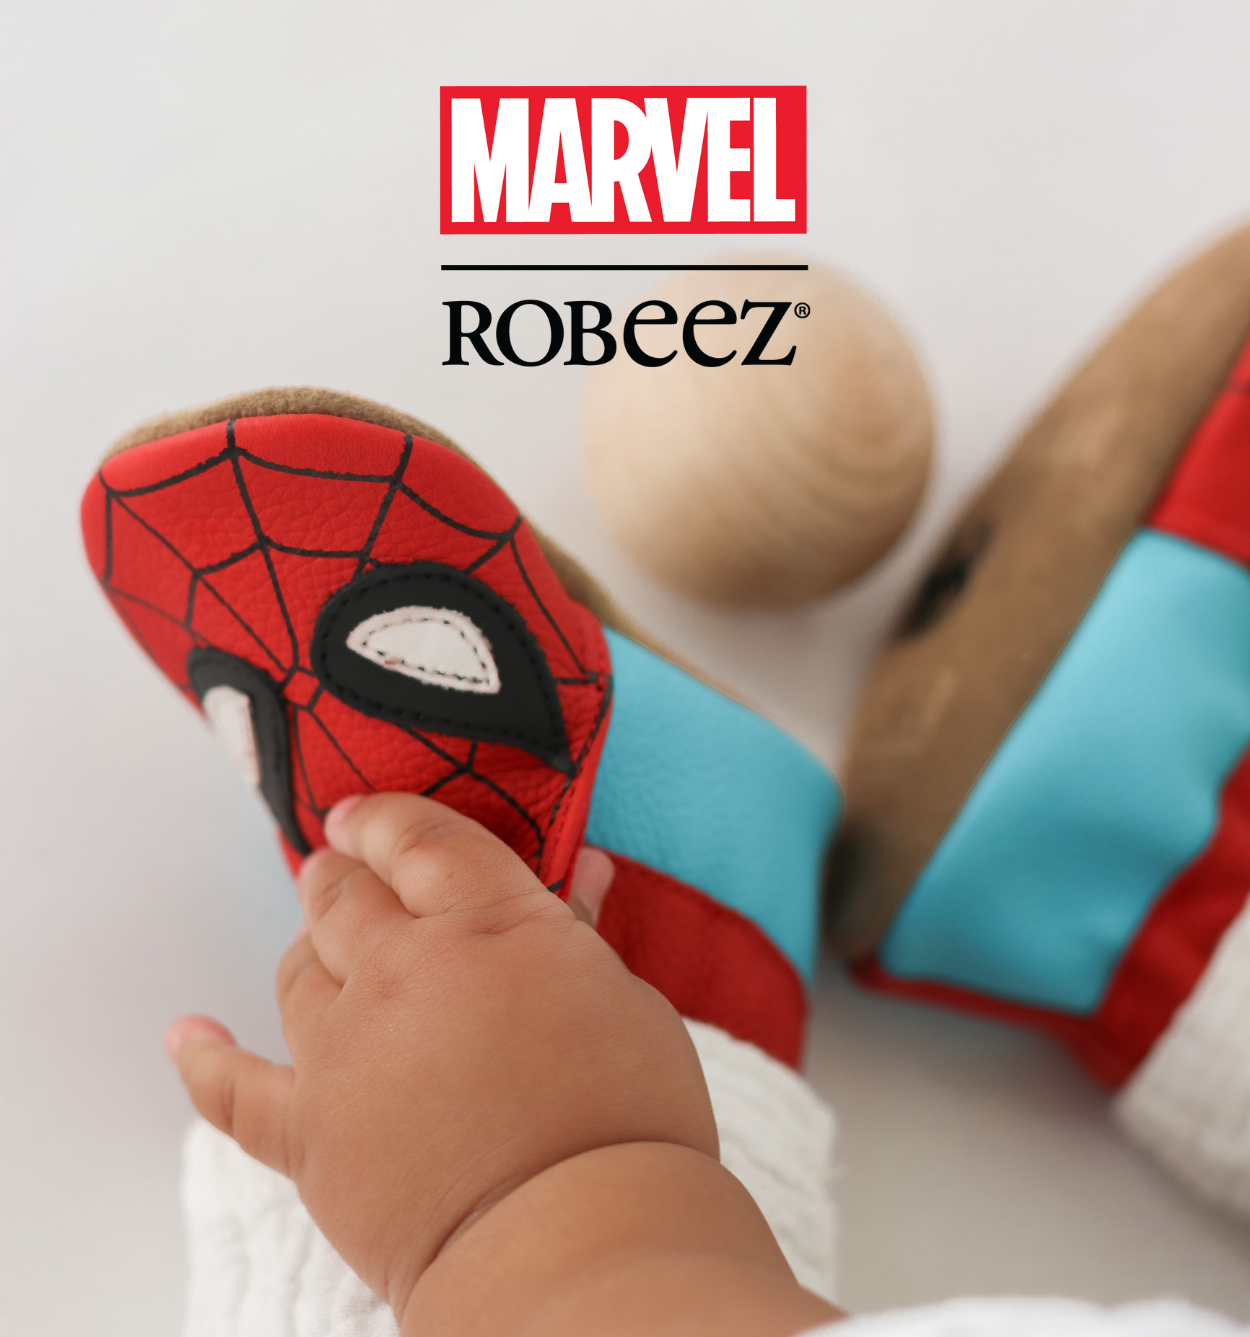 Robeez: Swing into Spring with the Marvel Collection by Robeez